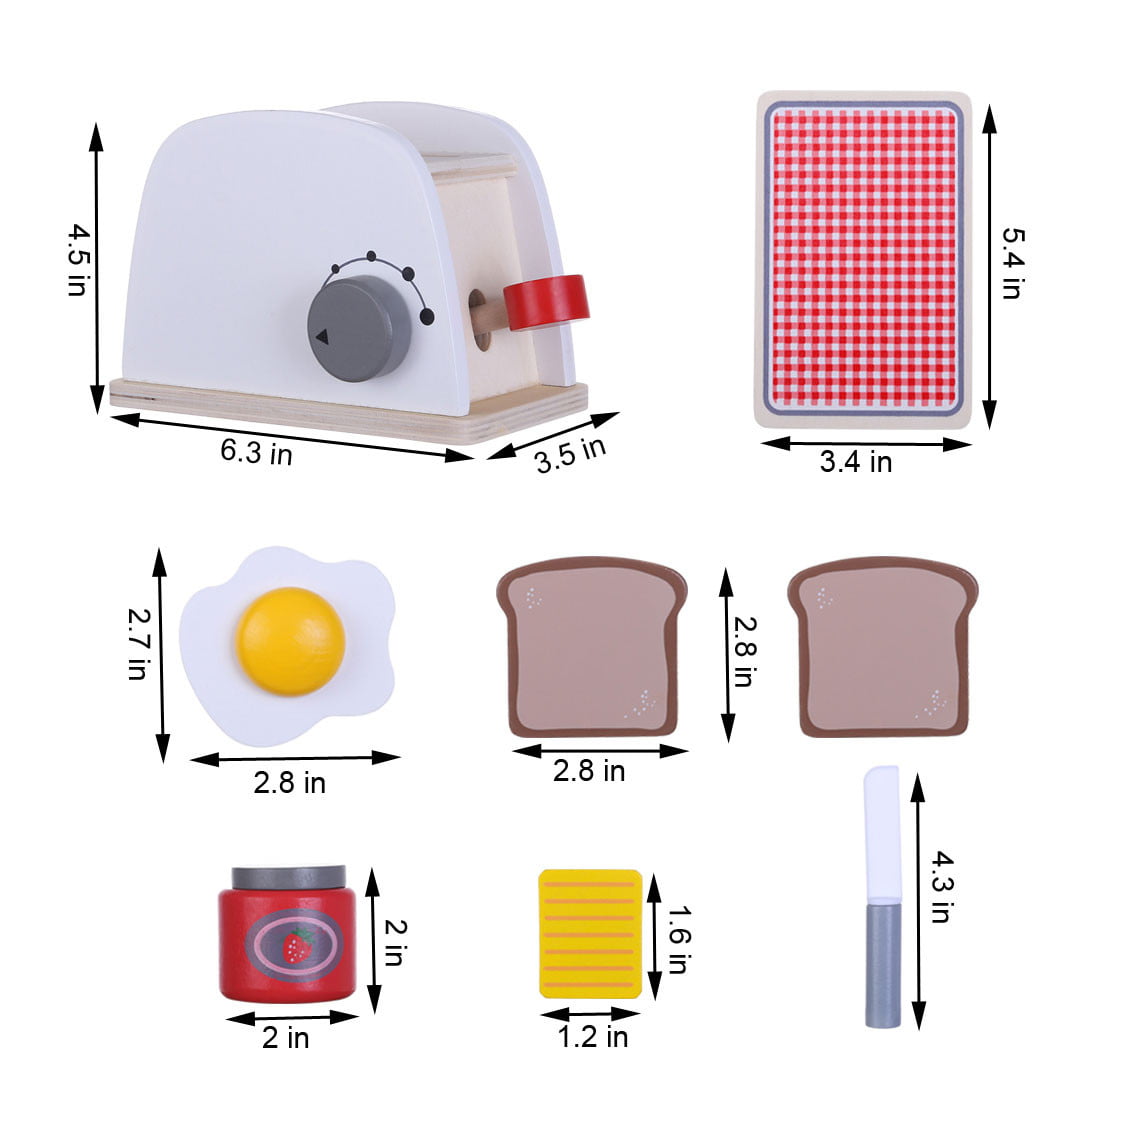 Details about   Wooden Simulation Pop-Up Toaster Playset With Dial To Indicate The Size Setting 